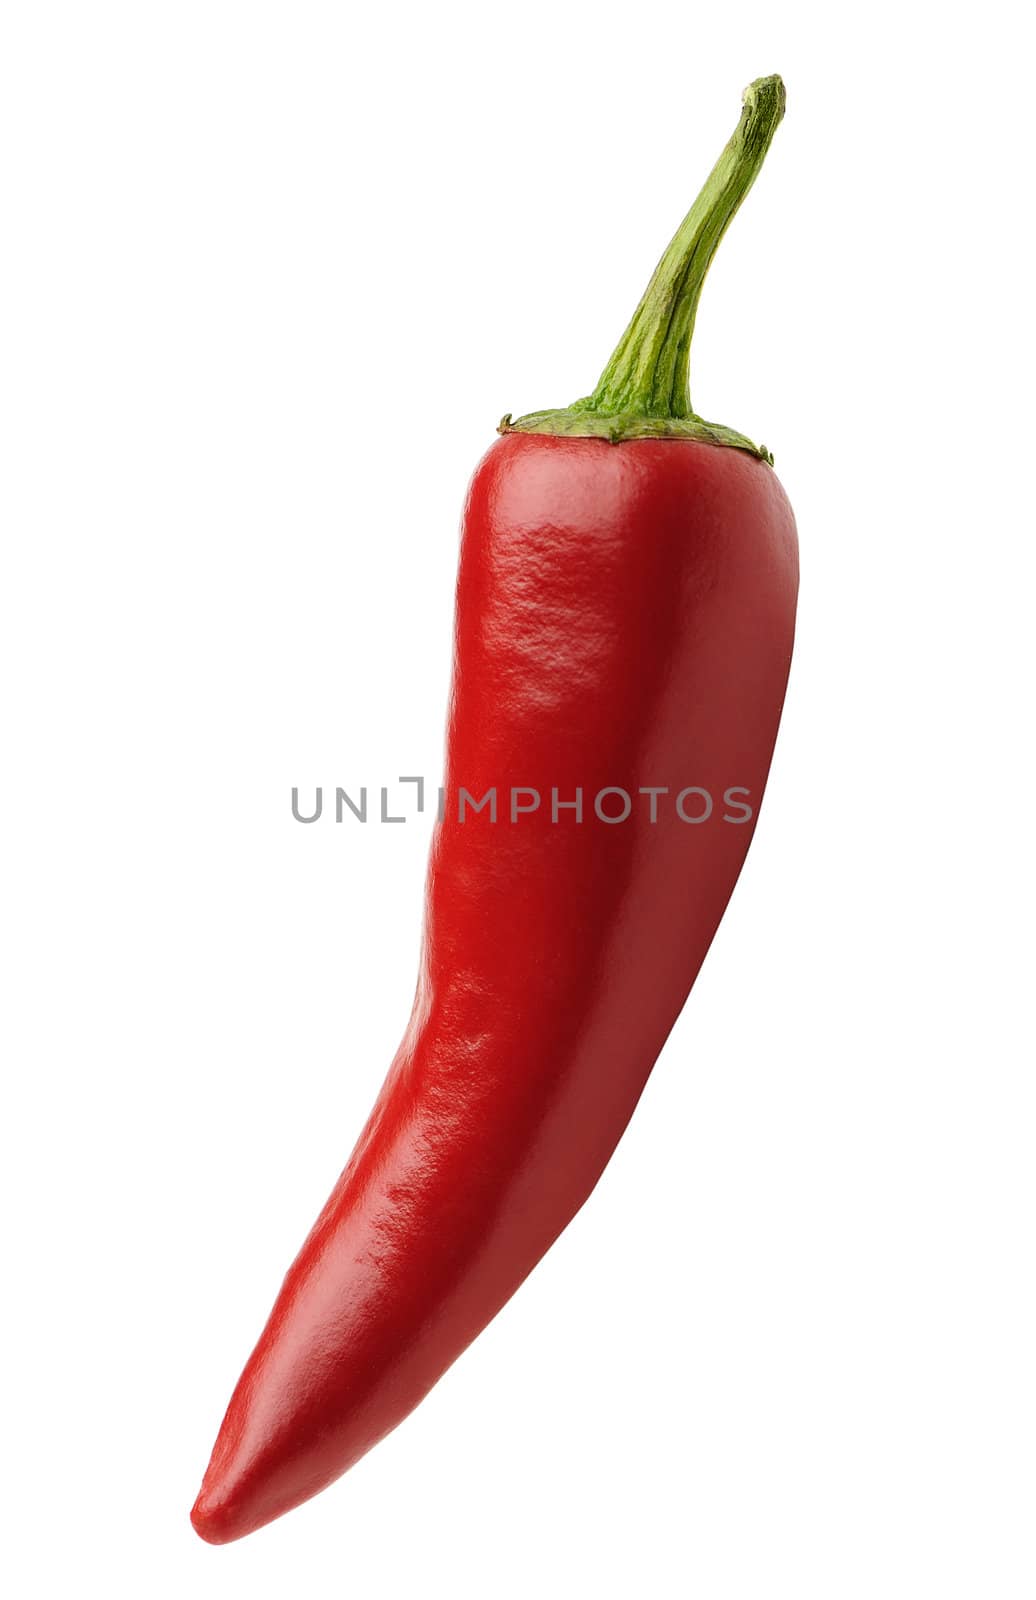 Red bitter pepper. Isolated on white background